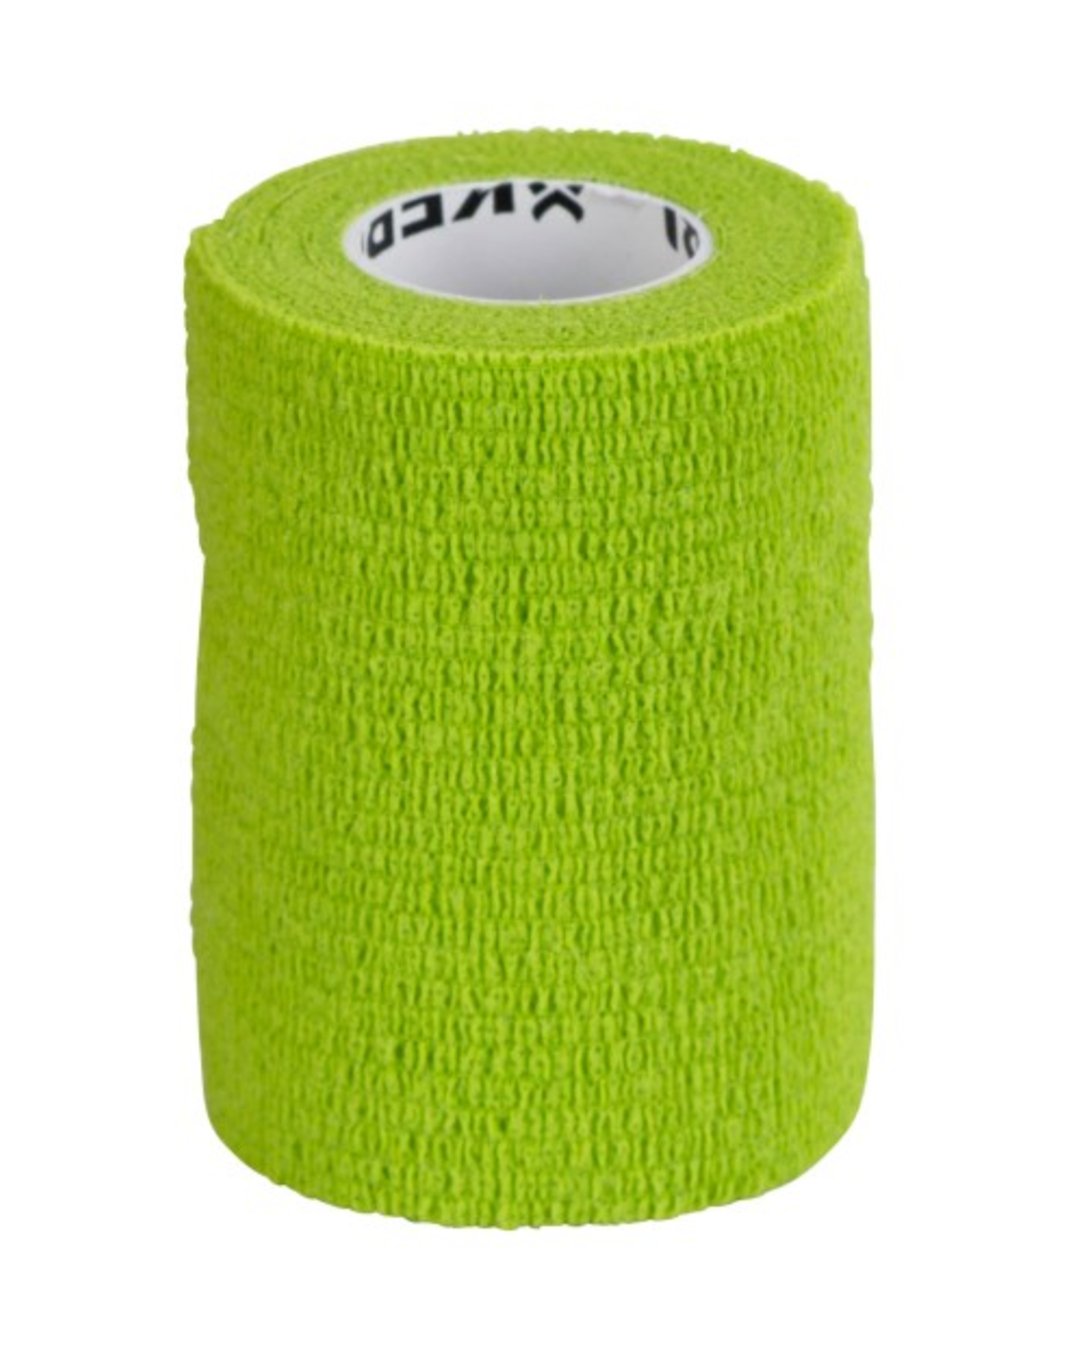 Selbsthaftende Bandage EquiLastic